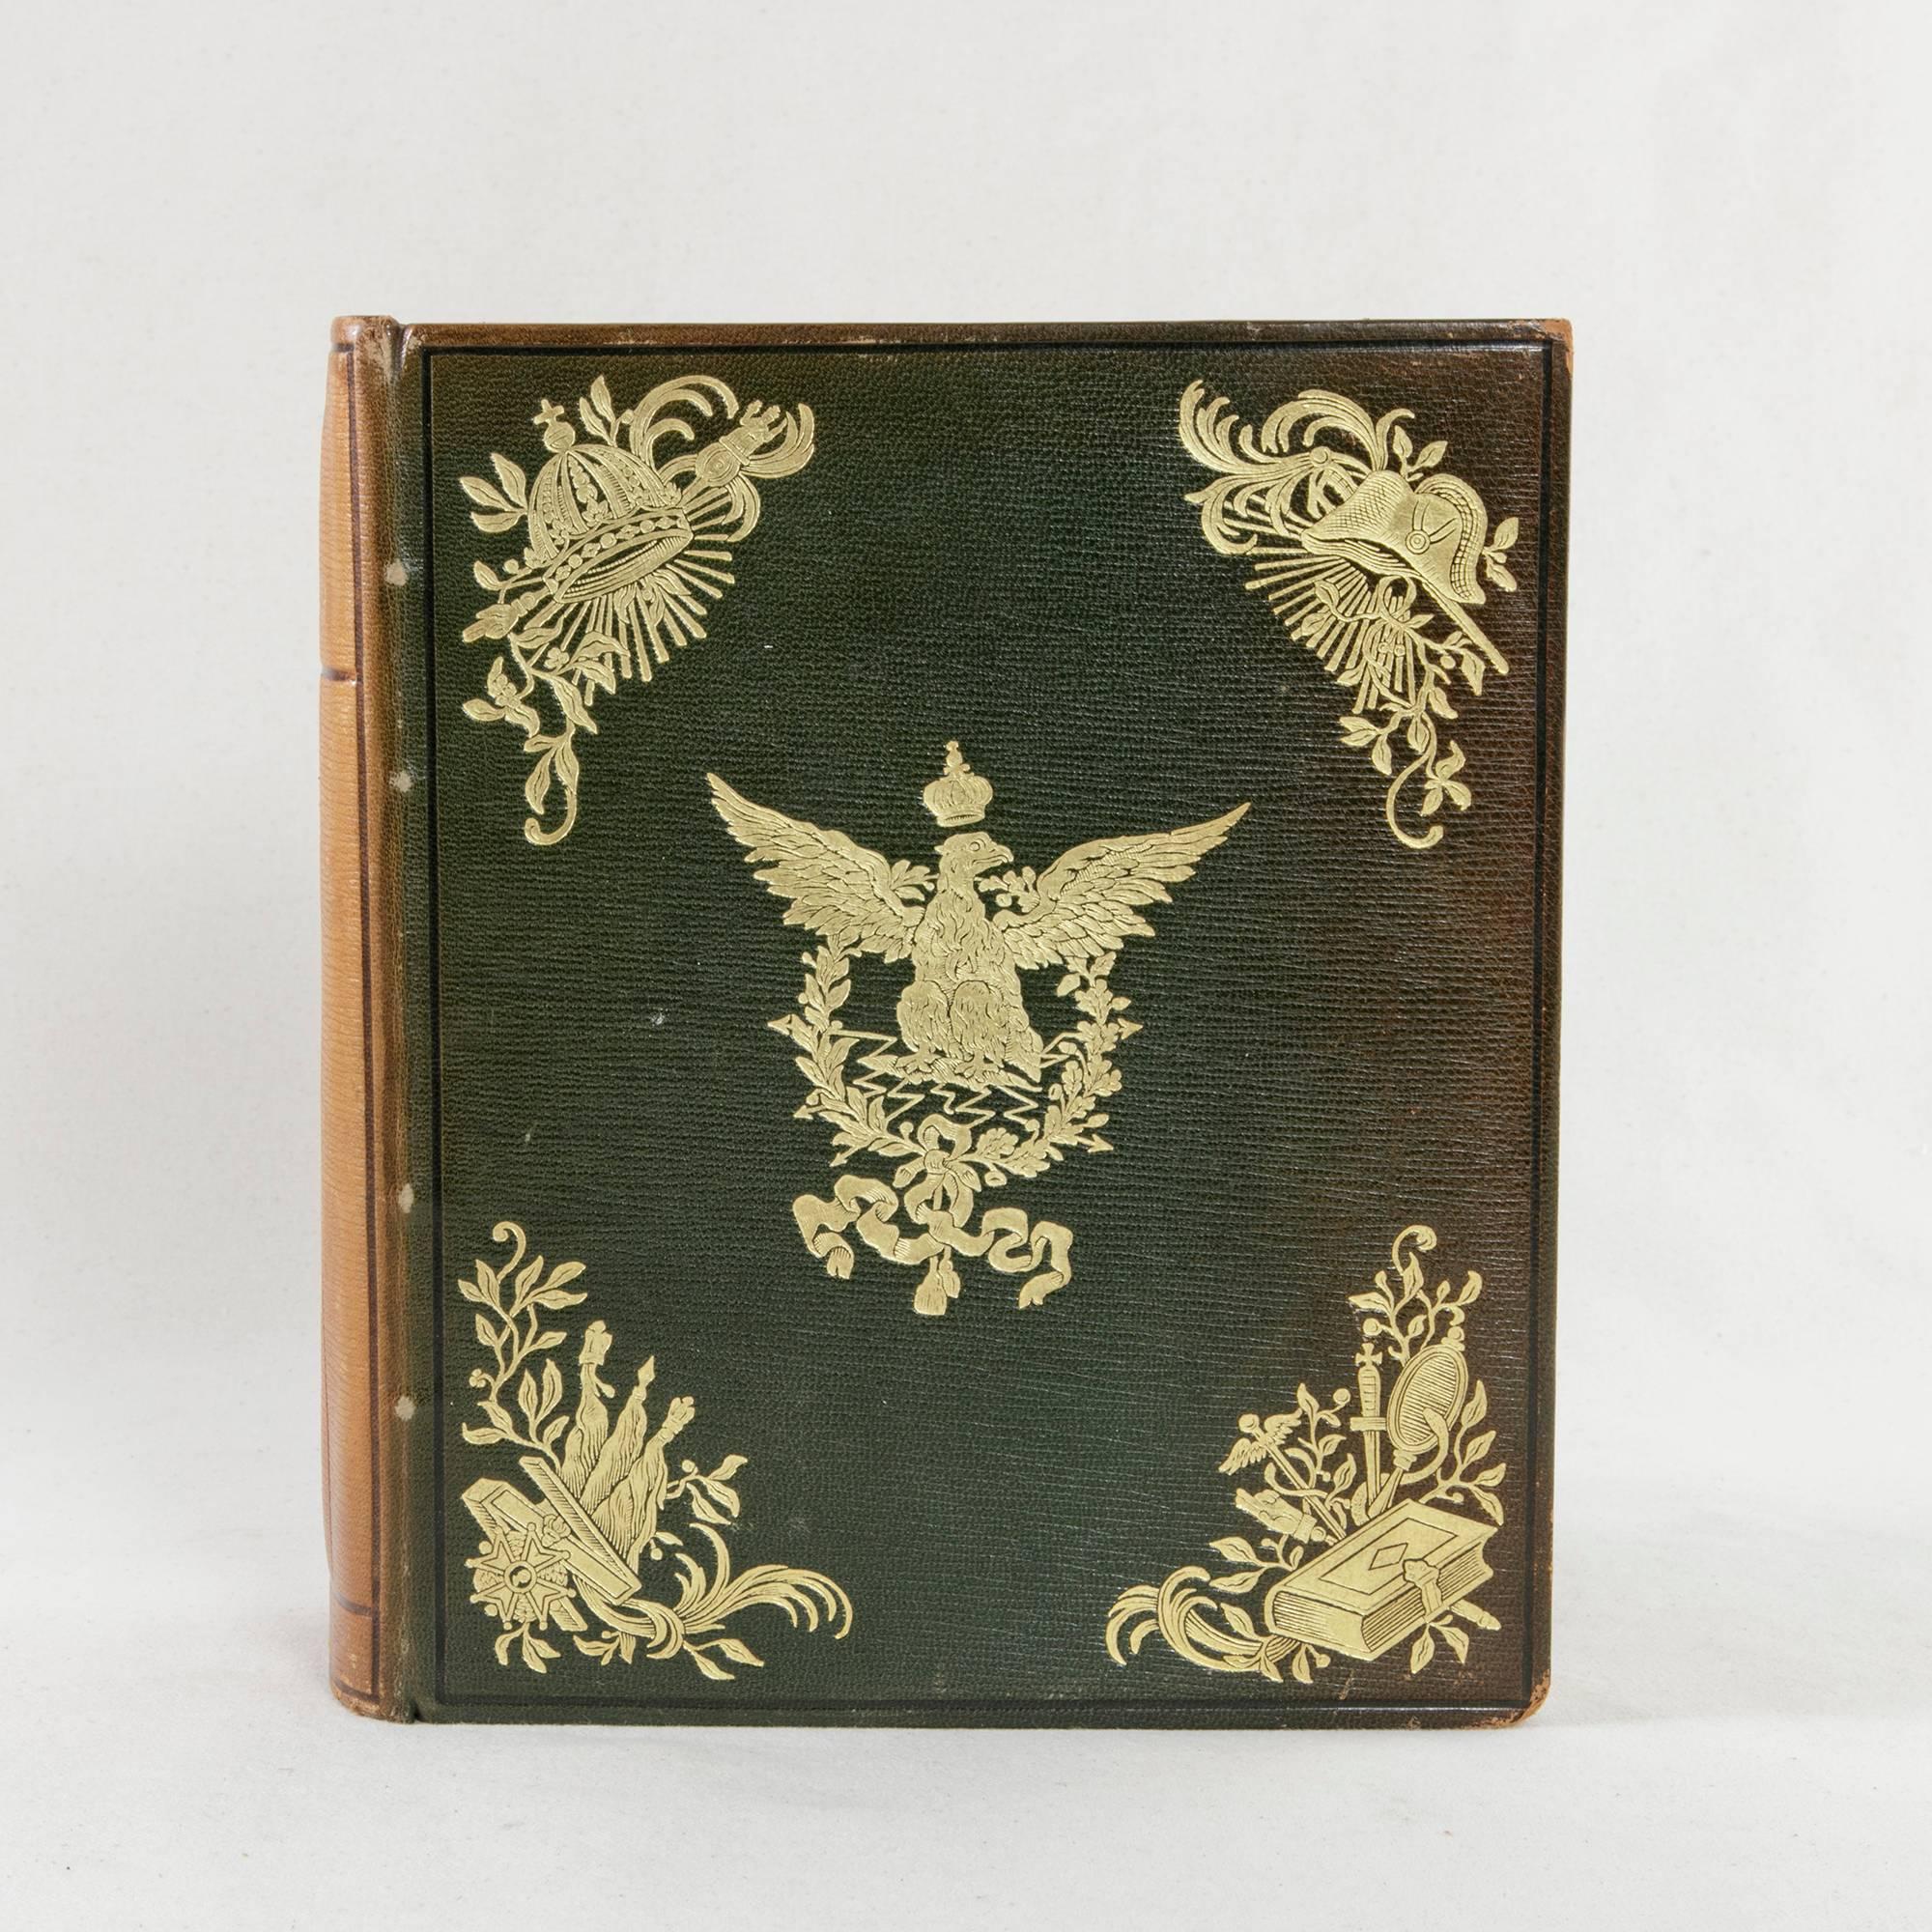 A chronicle of the feats of Napoleon Bonaparte and his Imperial Guard, this mid-20th century leather bound book written in French features a green leather front and back with a cognac colored leather spine. This volume is ornately gold tooled with